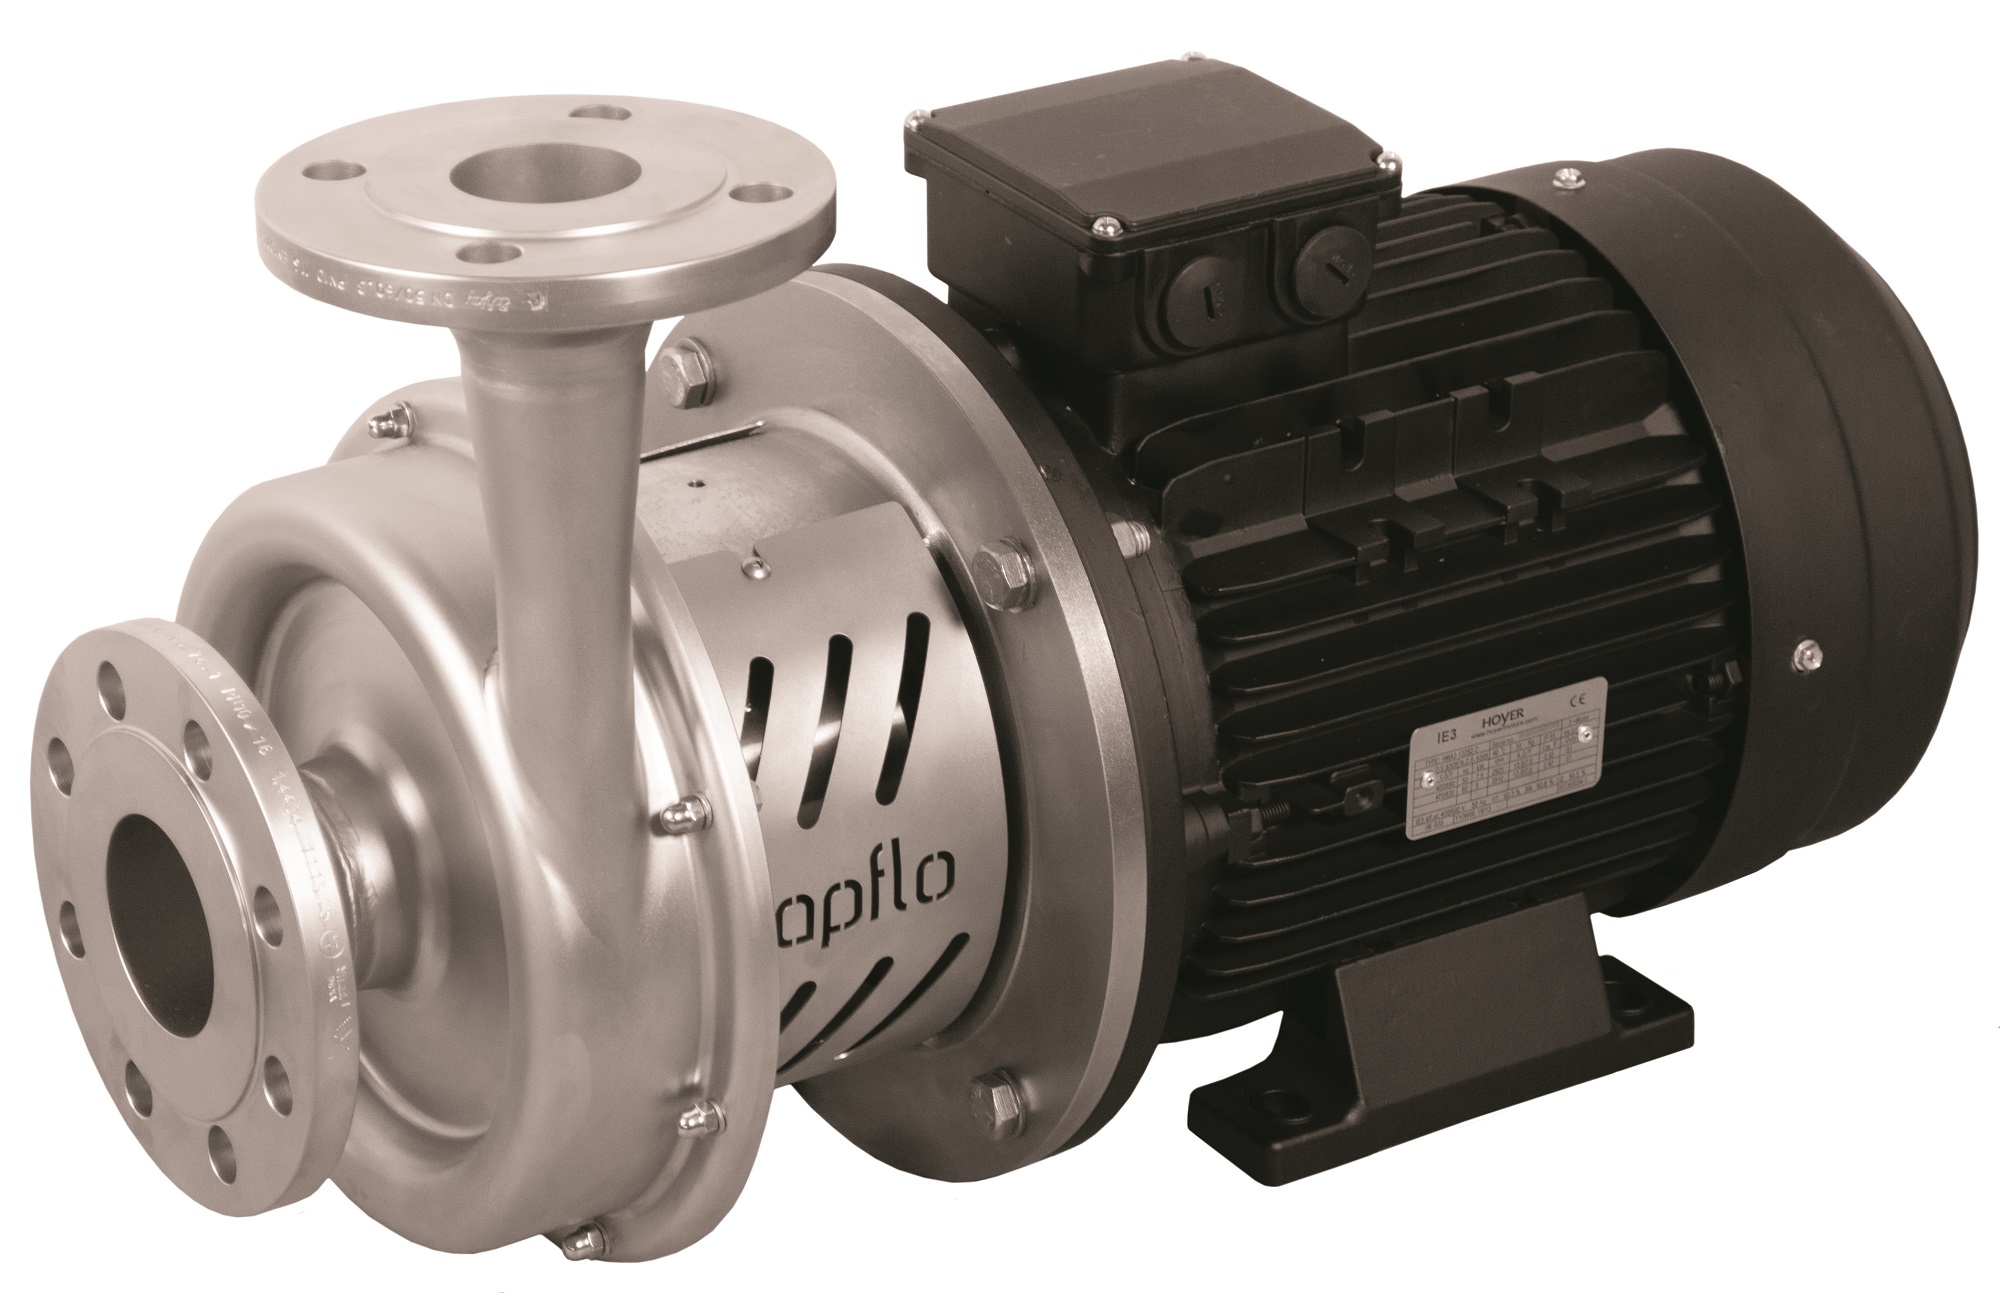 Tapflo’s CTX pumps are available in Hygienic (CTX H) and Industrial (CTX I) versions and offer high levels of performance in different operating conditions.